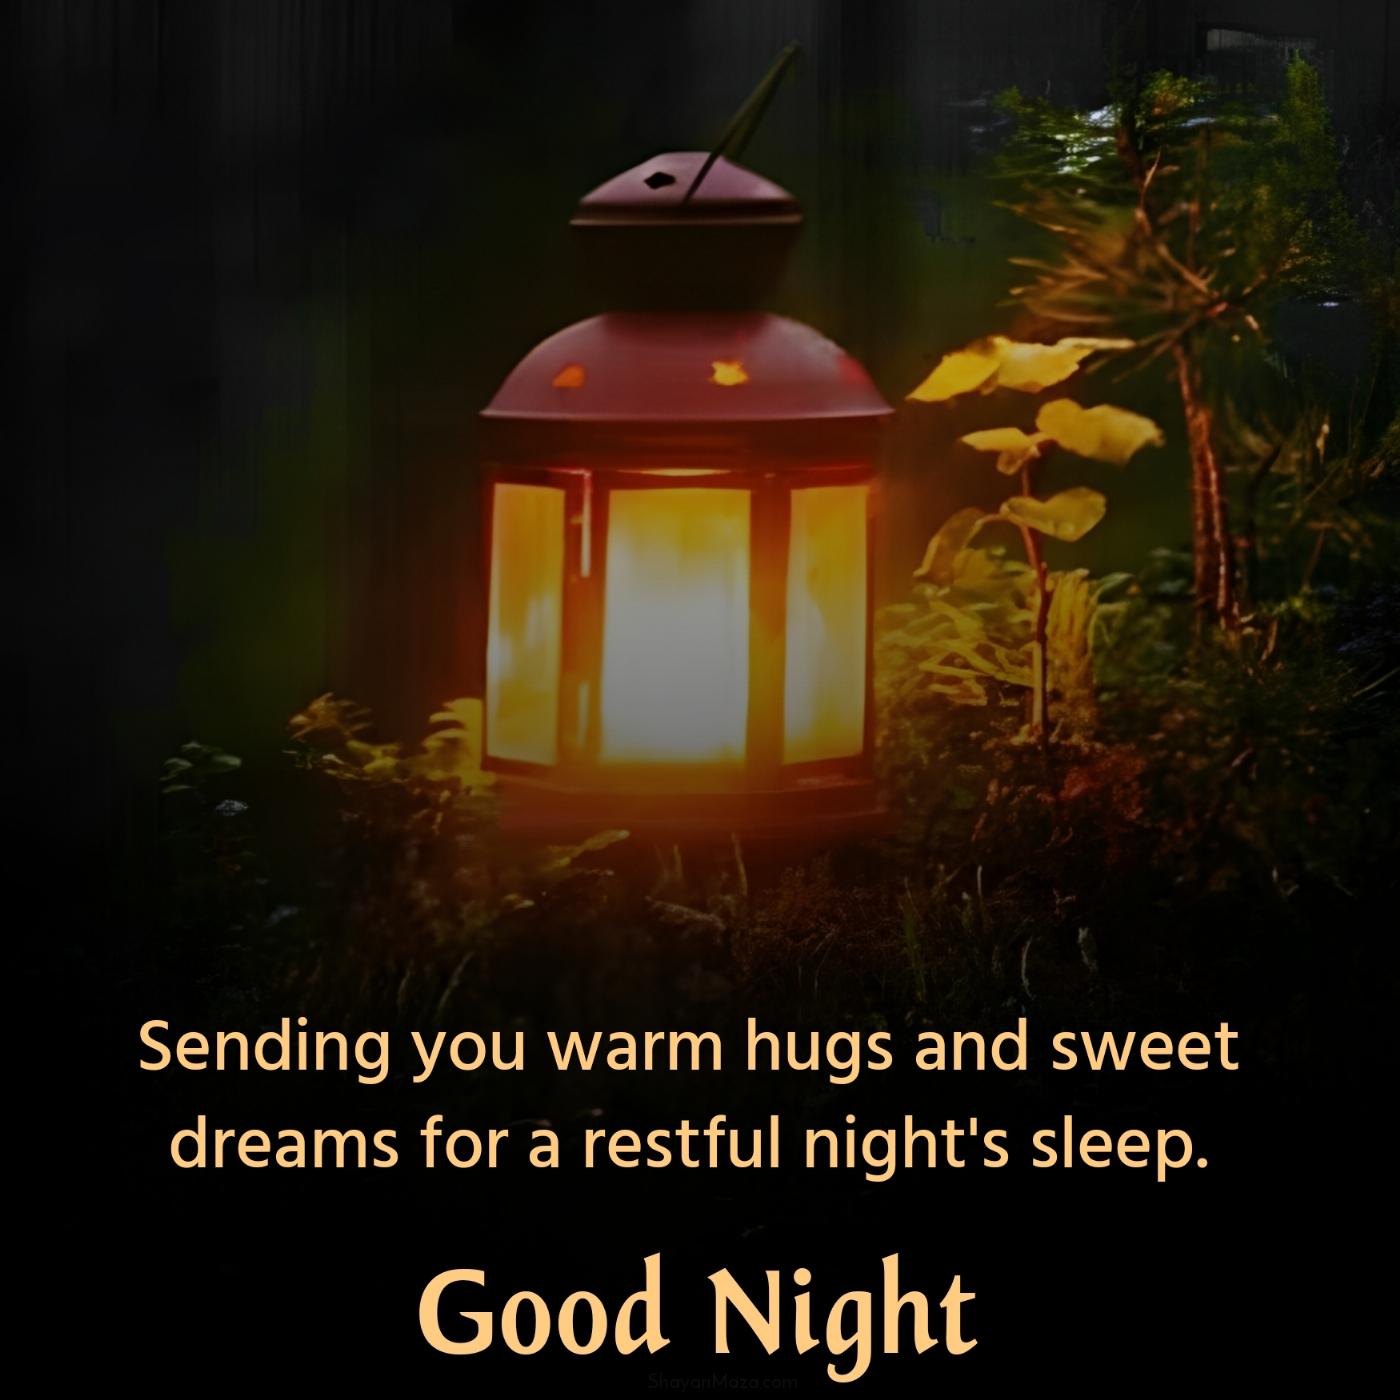 Sending you warm hugs and sweet dreams for a restful